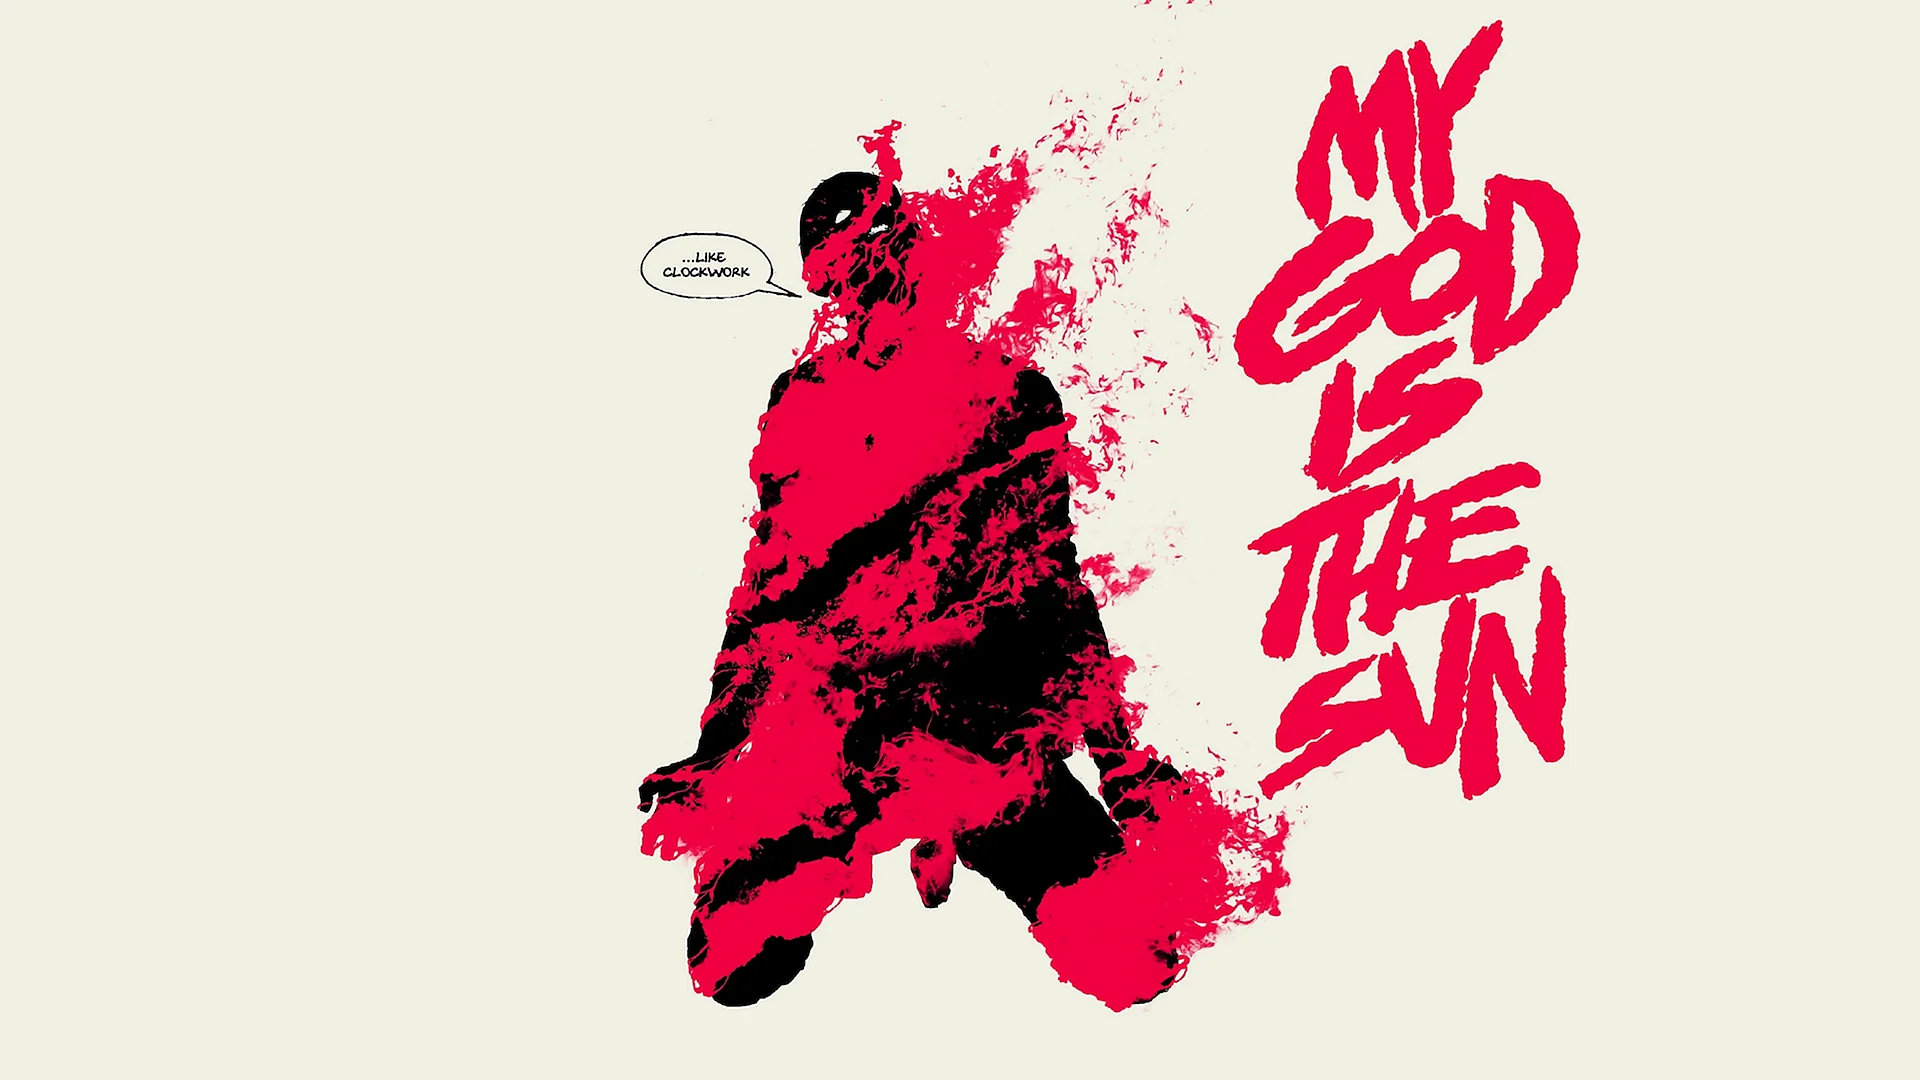 Queens Of The Stone Age Like Clockwork Wallpaper